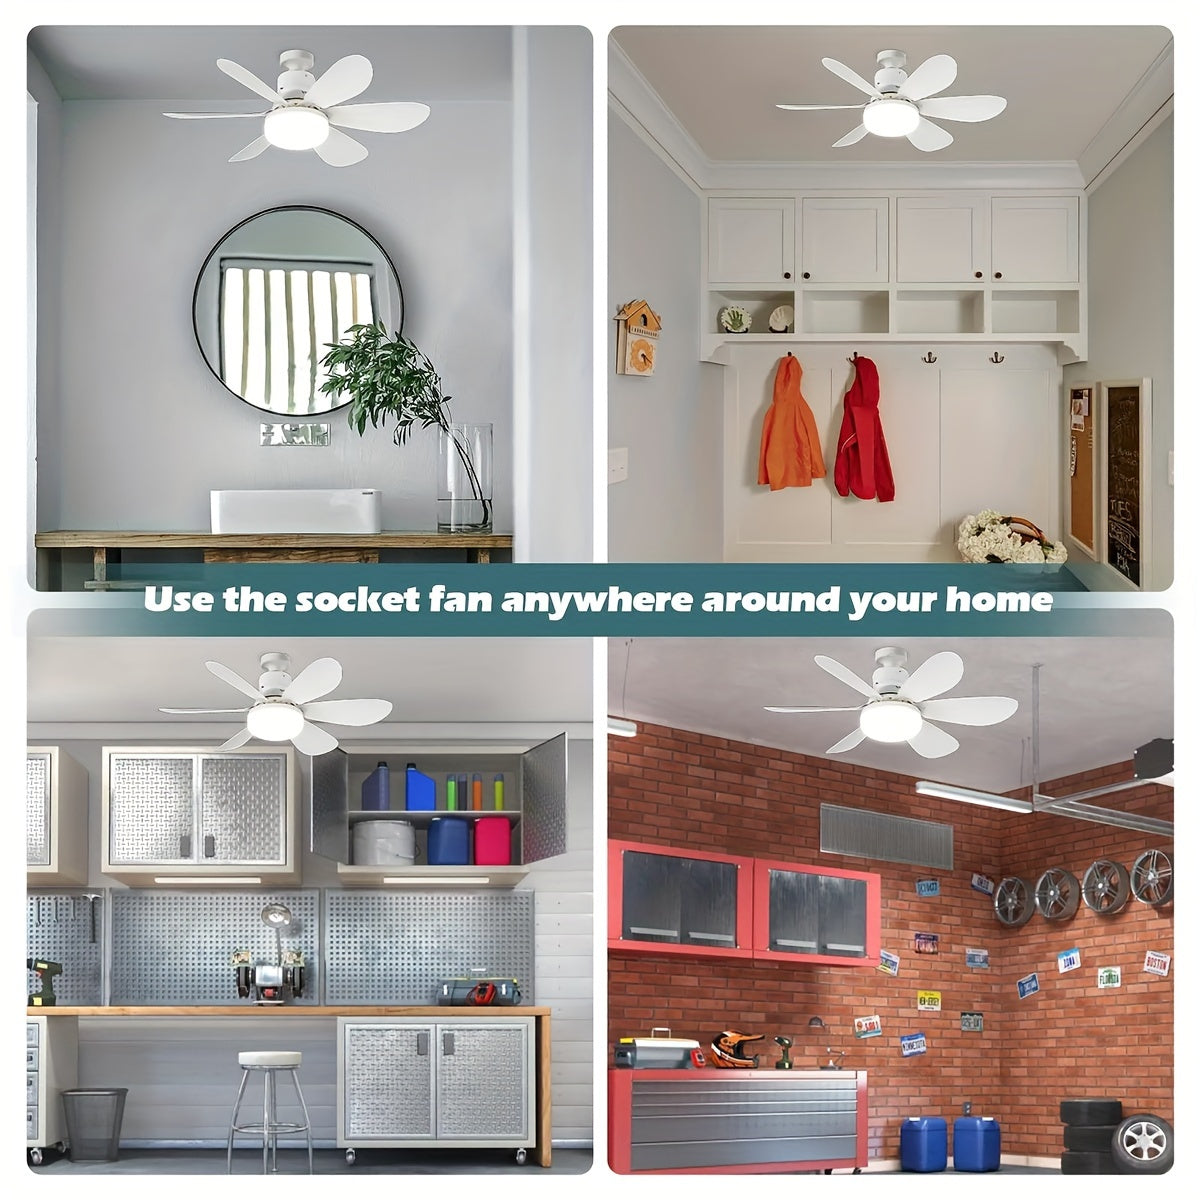 1pc Socket Fan Light, Screw Ceiling Fans With Lights And Remote, E26/E27 Easy Install Ceiling Fan, Base Small Ceiling Fan Replacement For Light Bulb, Dimmable Socket Fan Ceiling, Fan With Light For Bathroom, Bedroom, Kitchen, Living Room